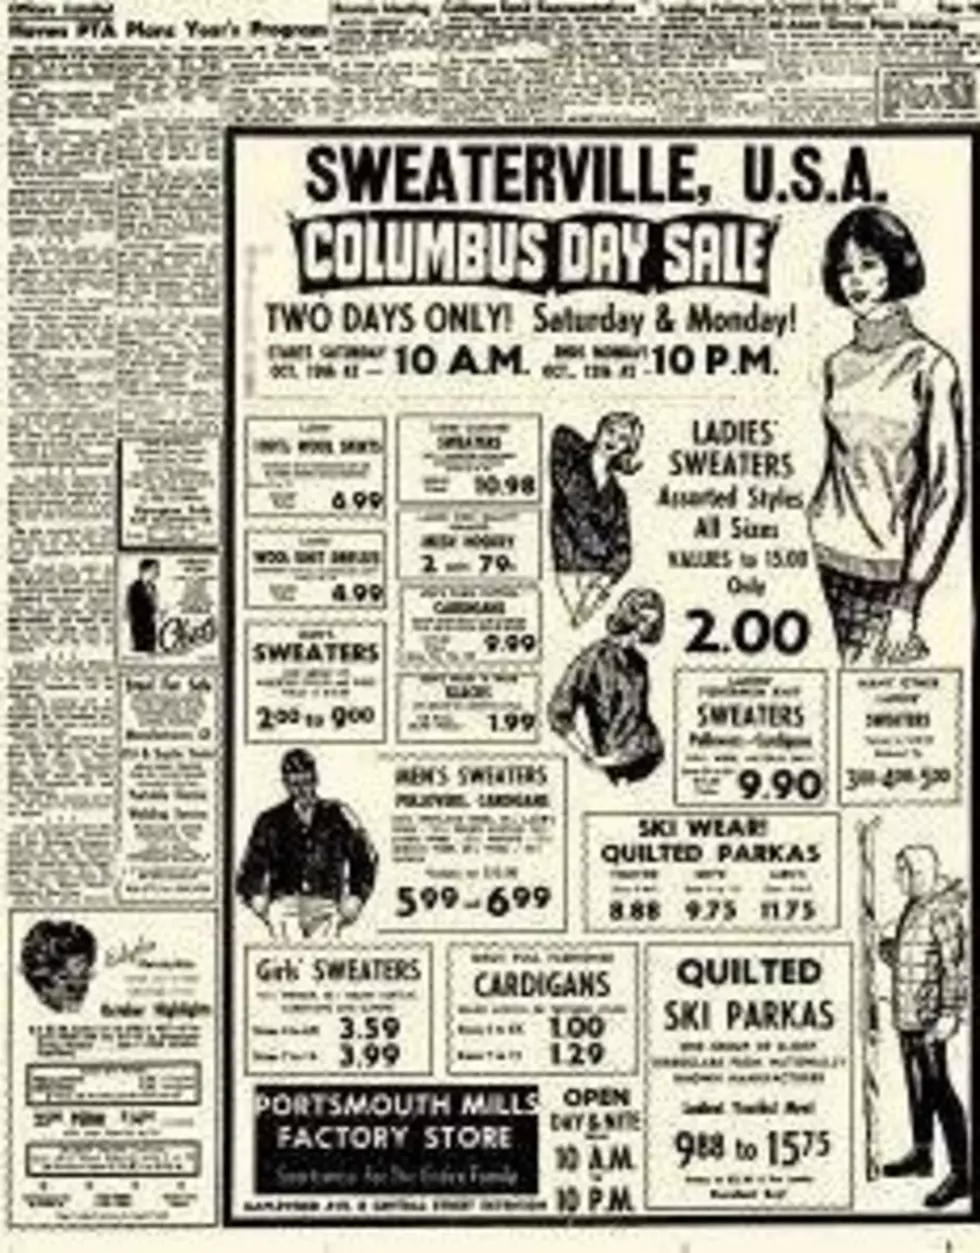 Do You Remember Shopping at Artisan Outlet and Sweaterville U.S.A?